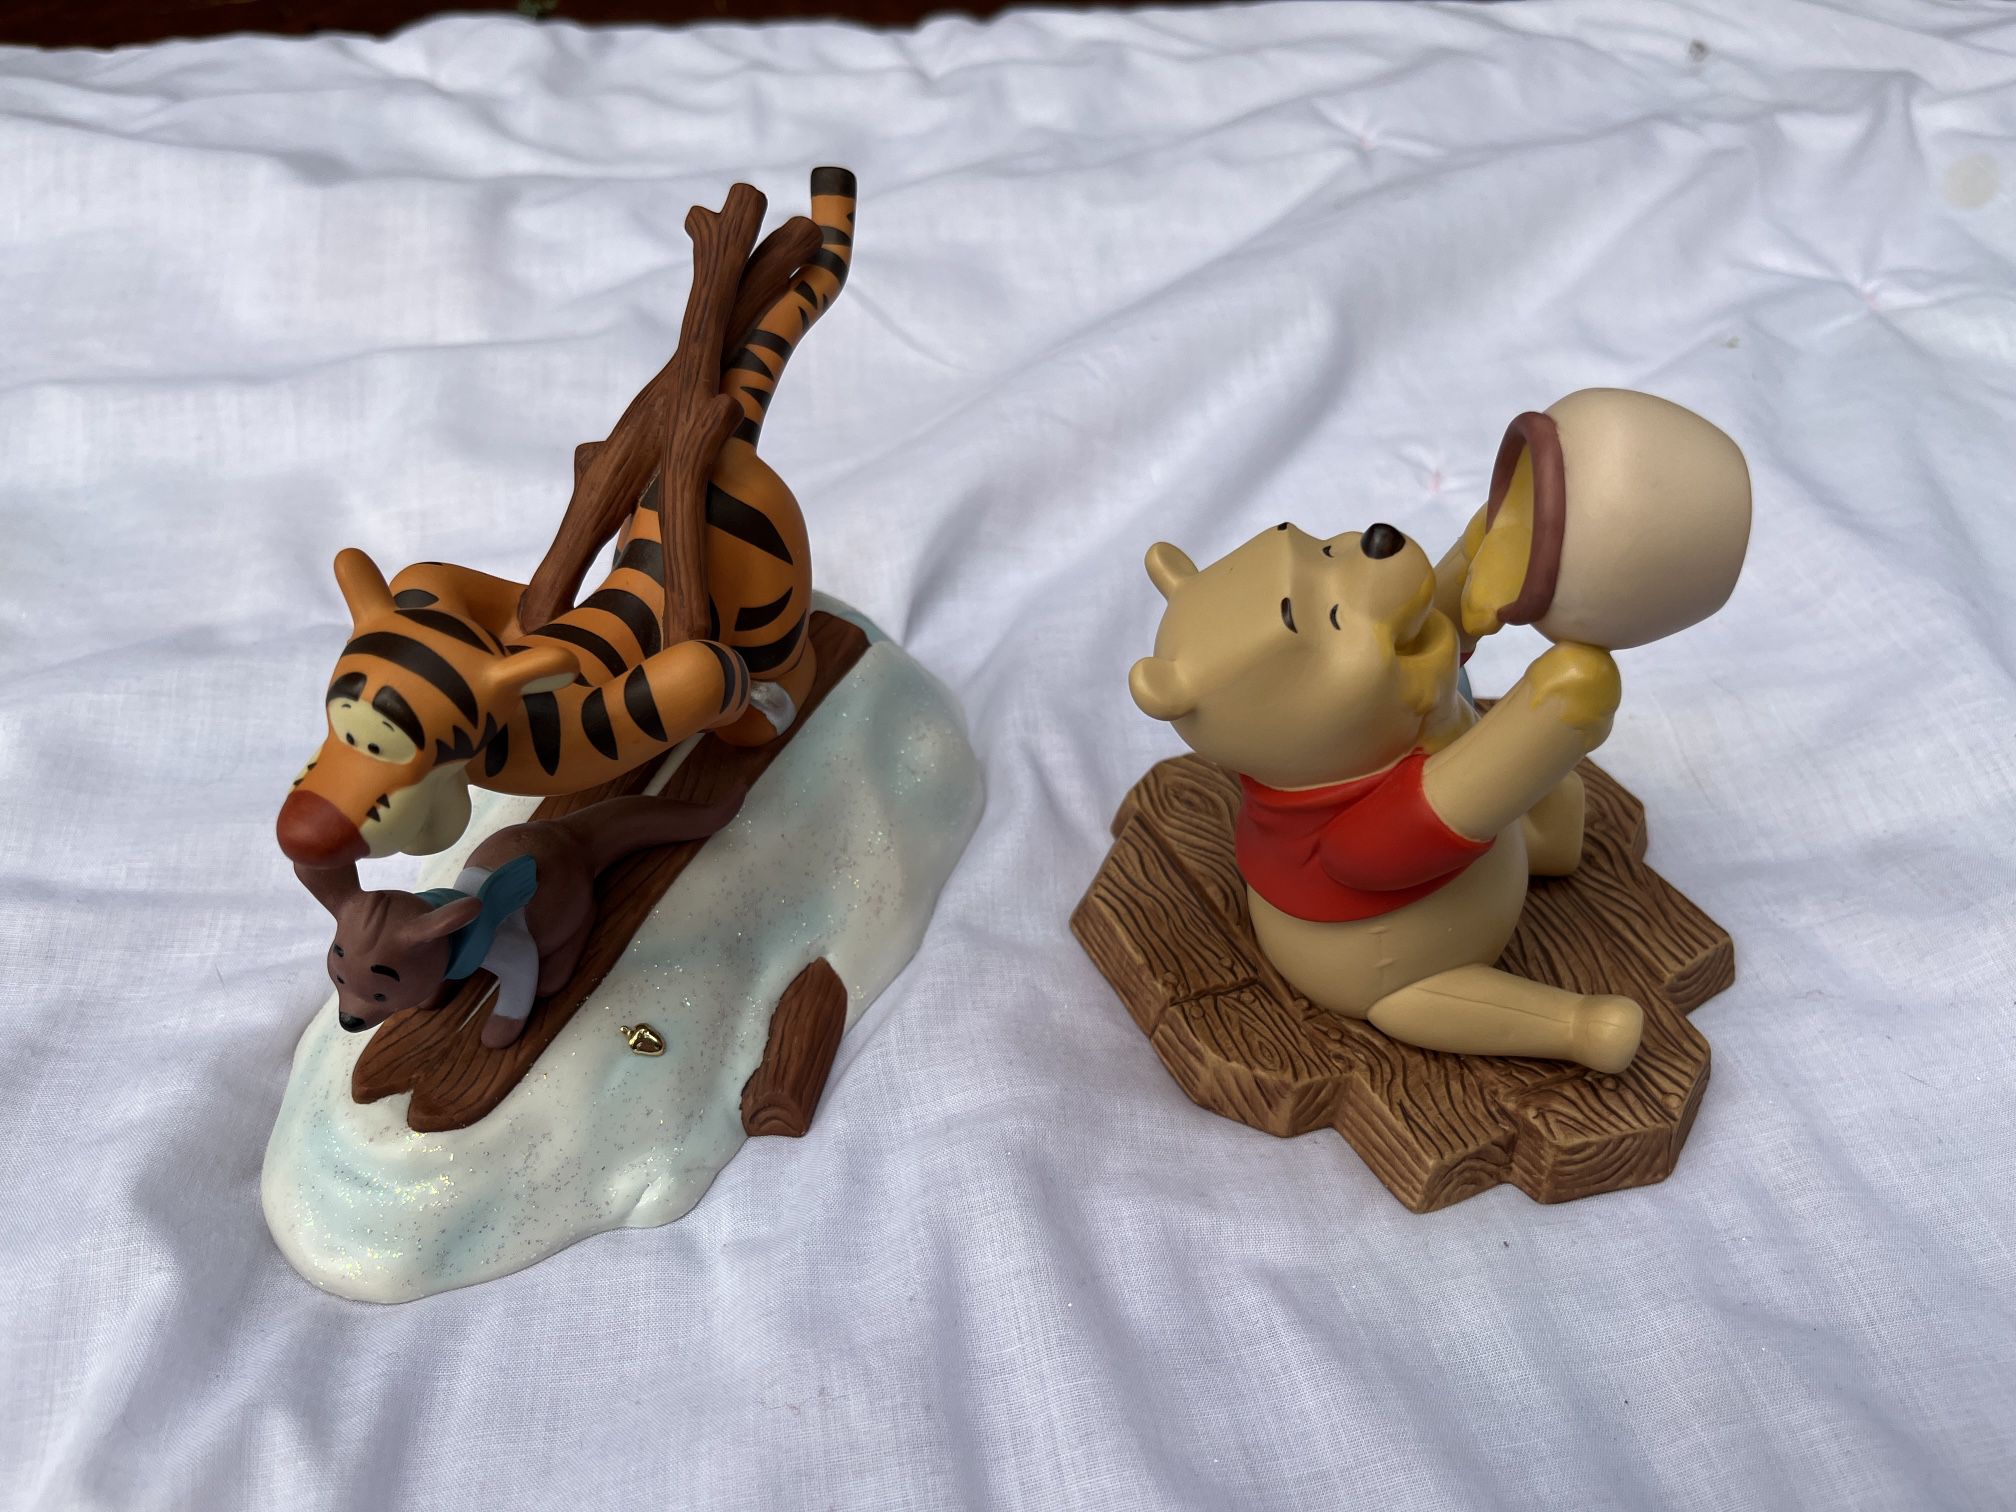 Disney Winnie the Pooh and Tigger Figures - new in boxes